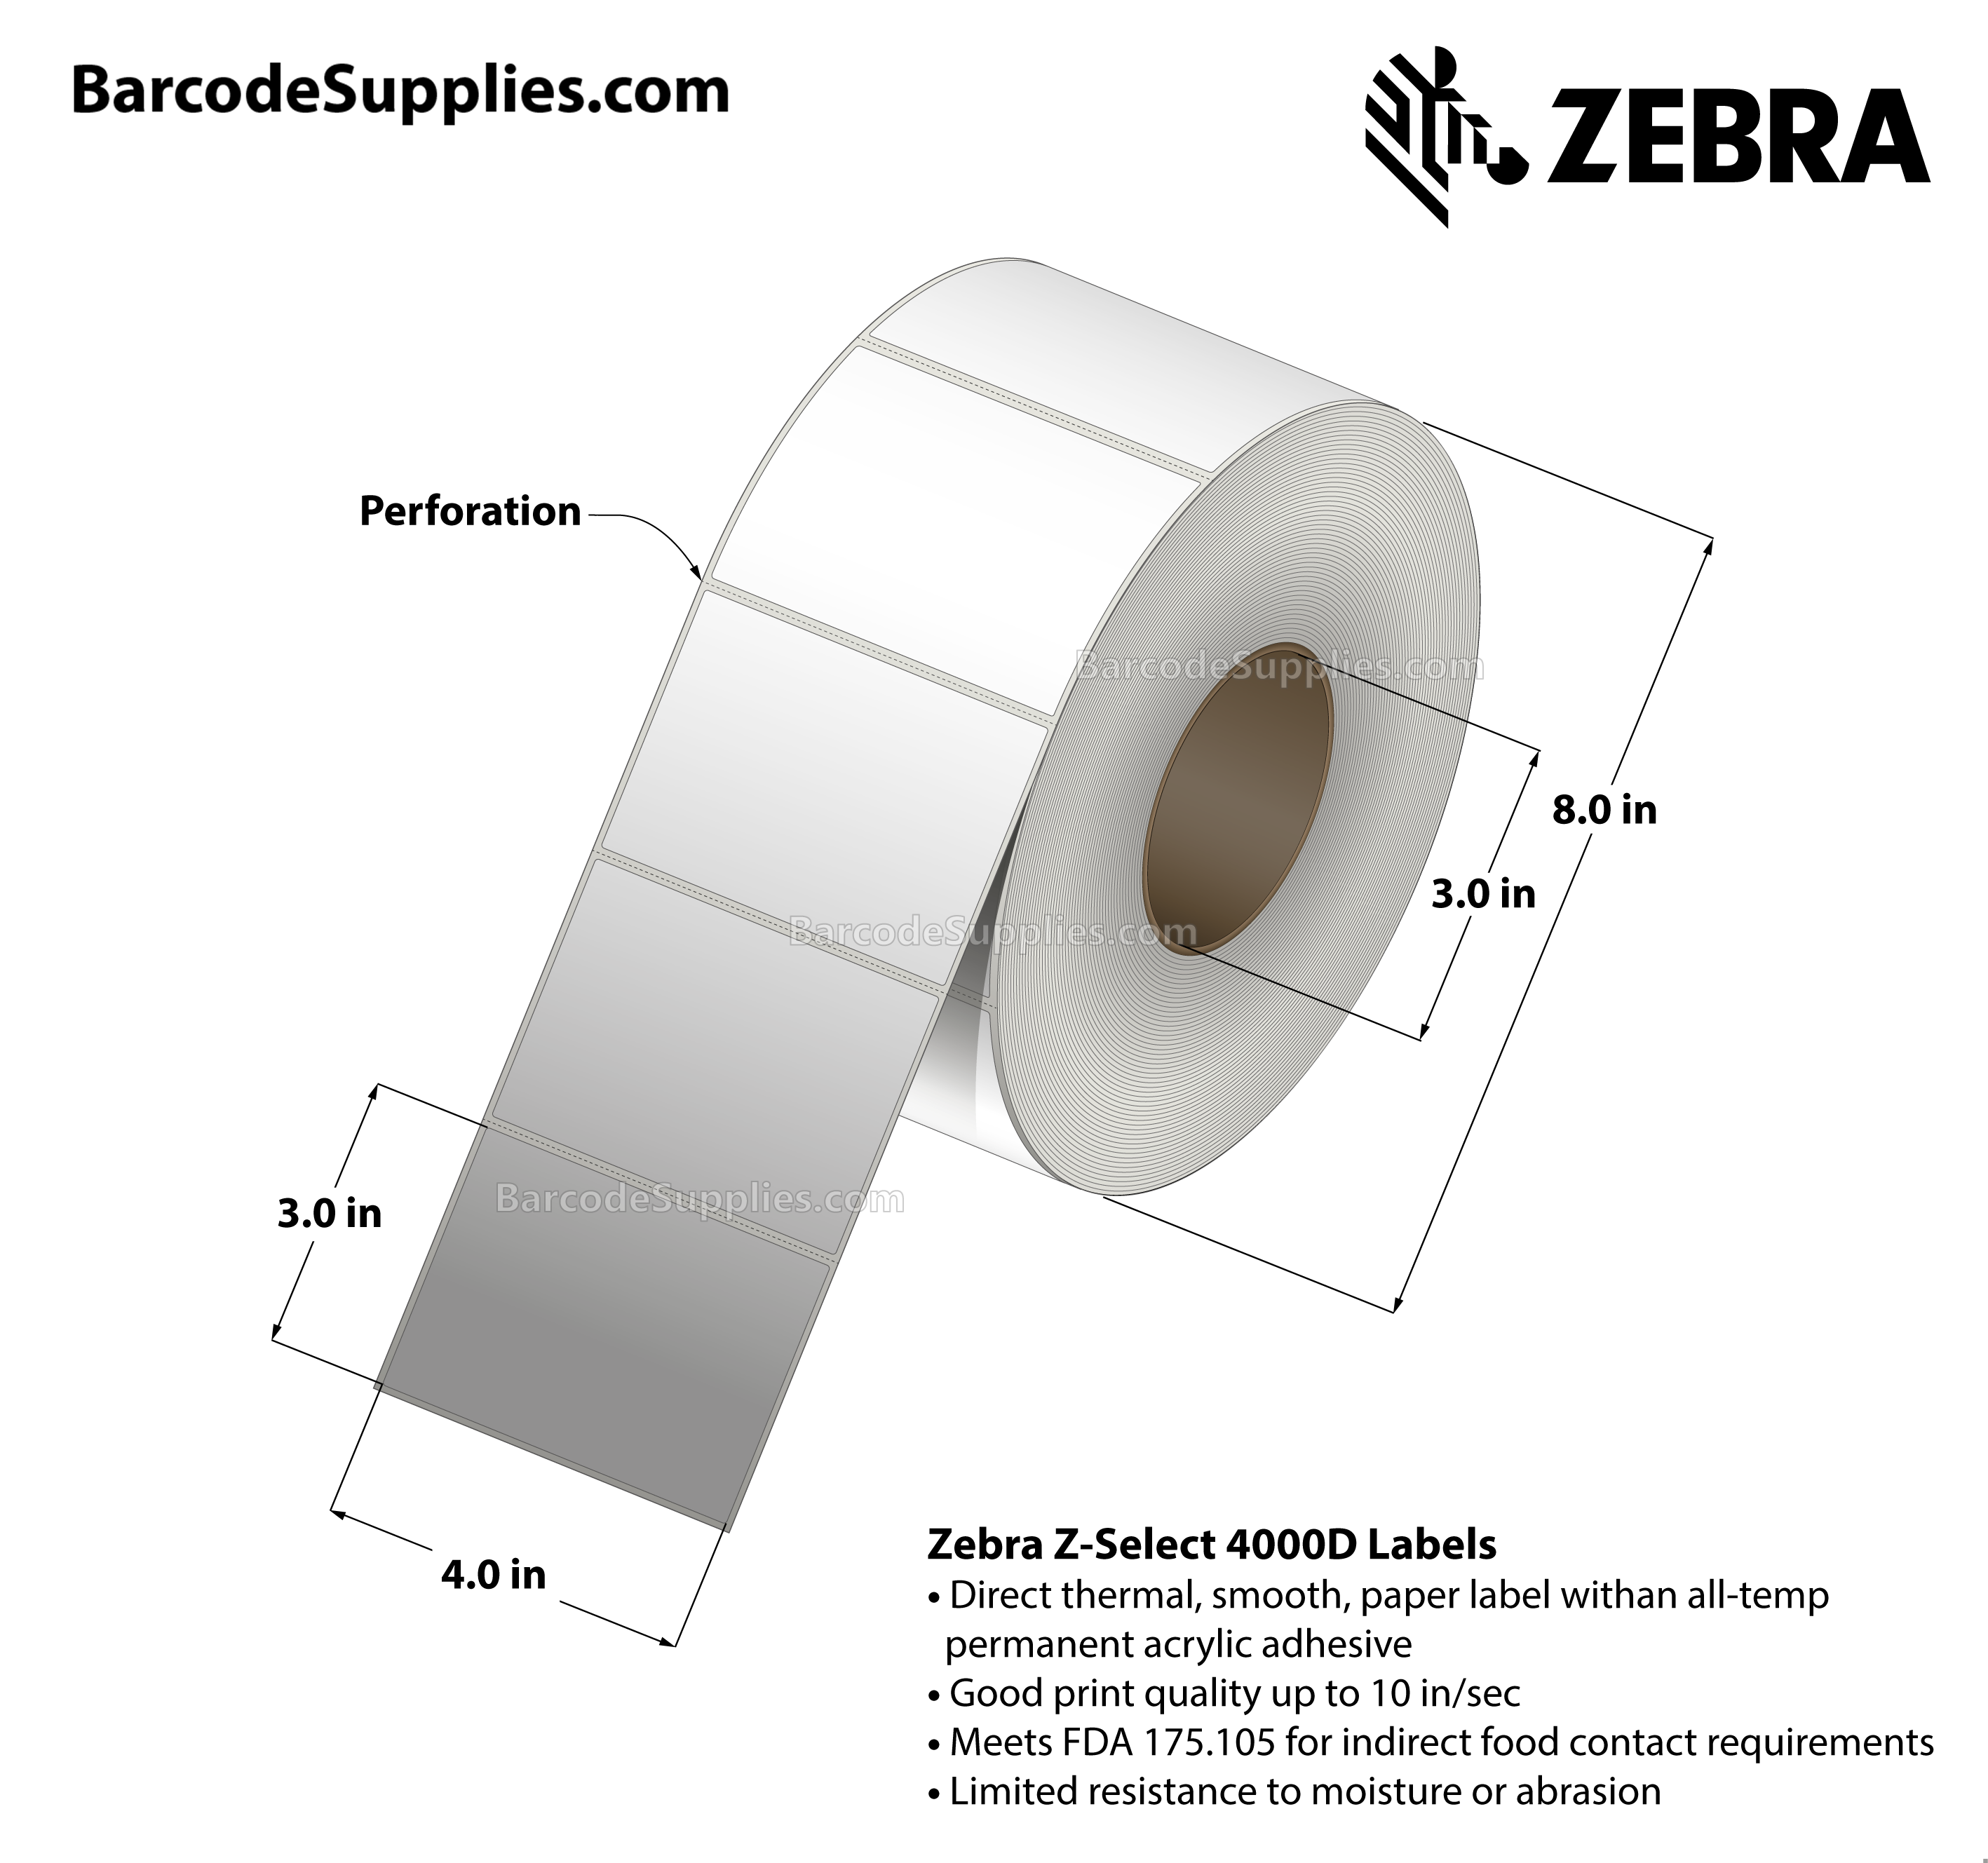 4 x 3 Direct Thermal White Z-Select 4000D Labels With All-Temp Adhesive - Perforated - 2238 Labels Per Roll - Carton Of 4 Rolls - 8952 Labels Total - MPN: 800740-305